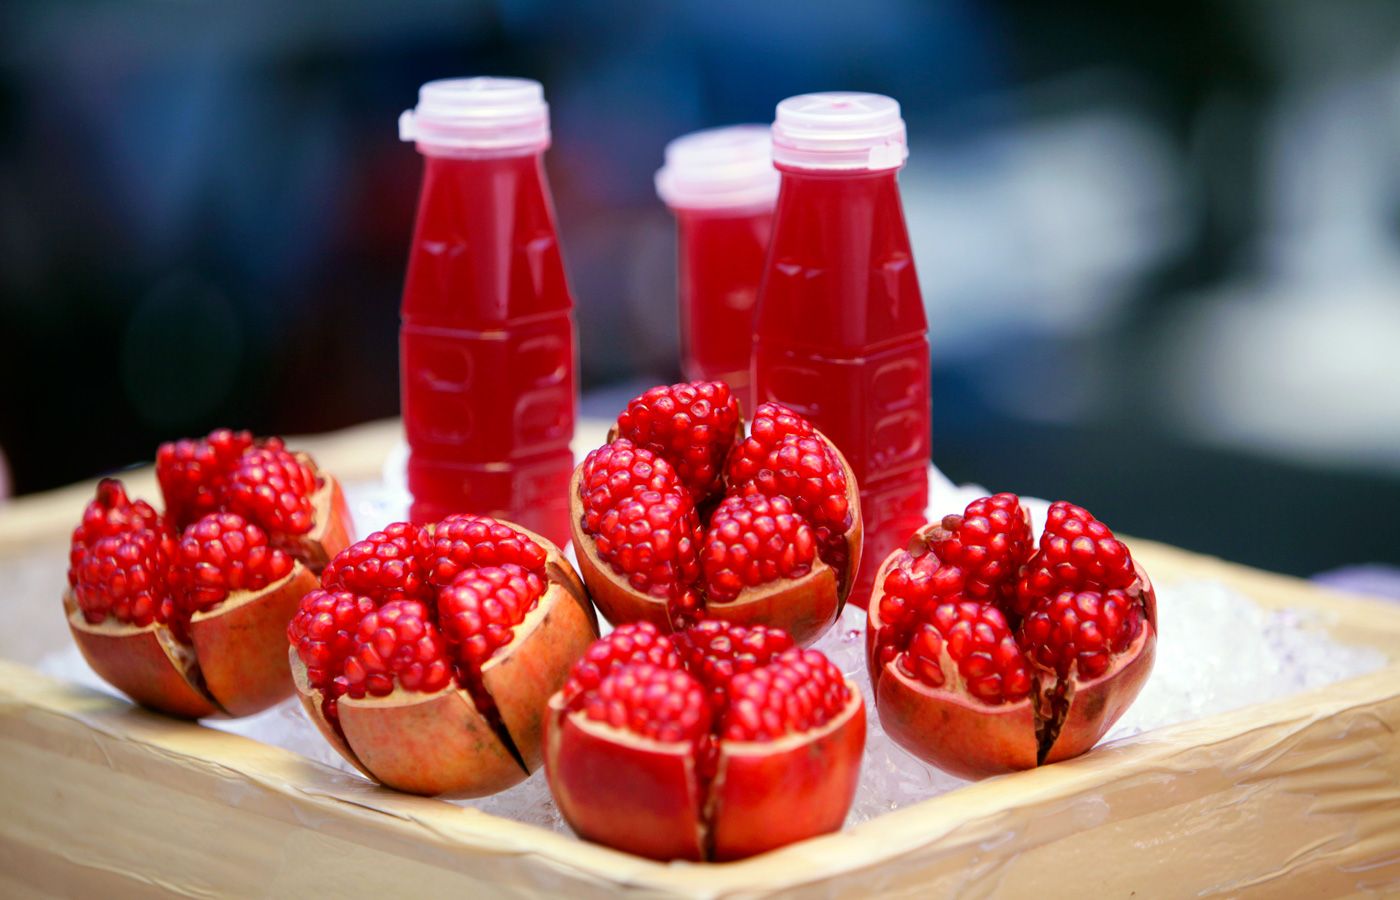 Pomegranate Juice - Top 10 street foods you must-try in Bangkok